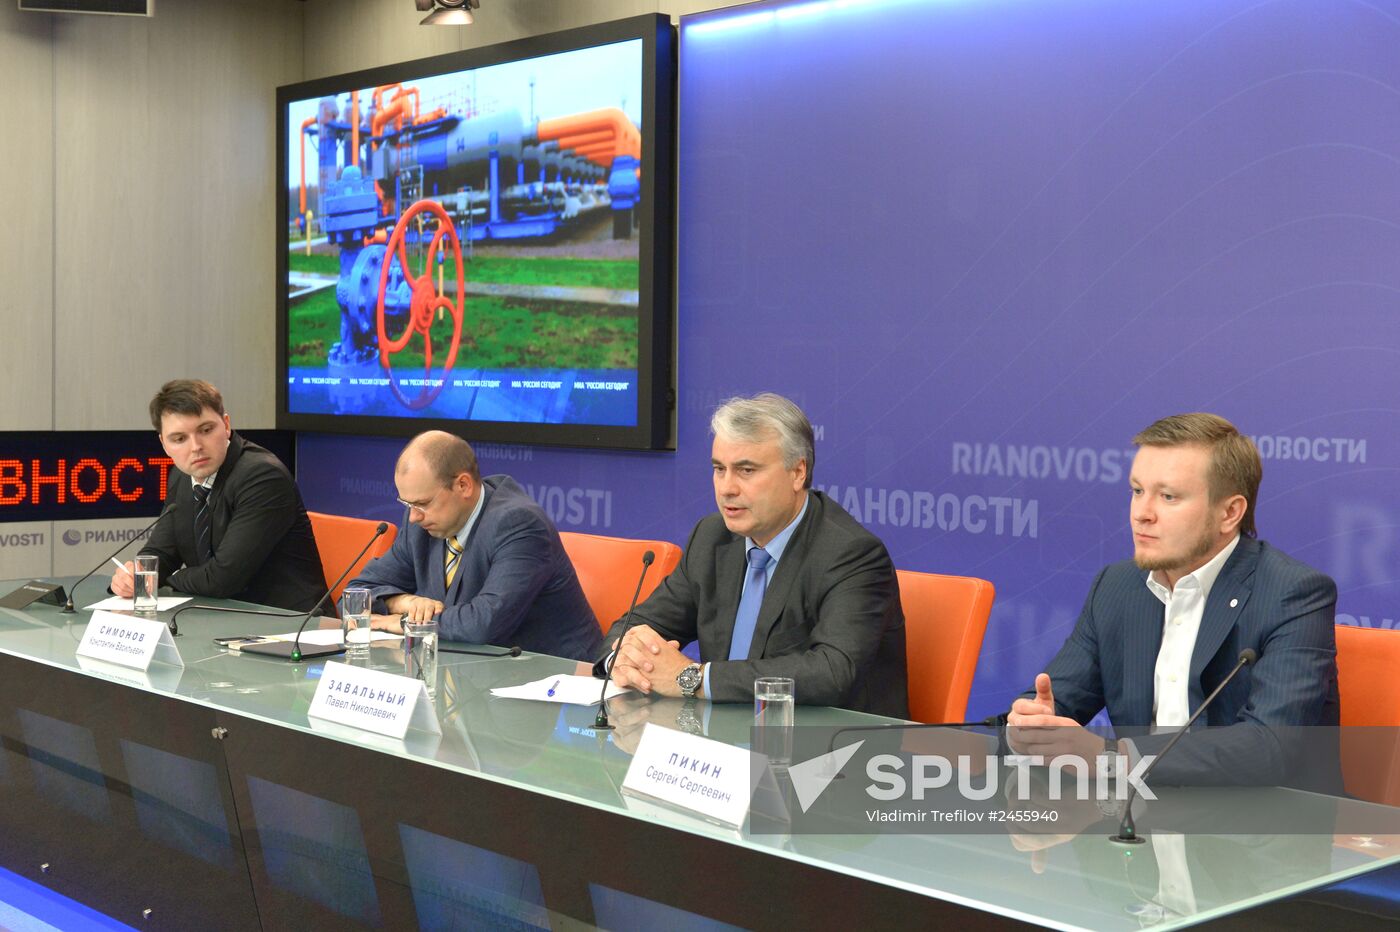 South Stream roundtable meeting on European energy security